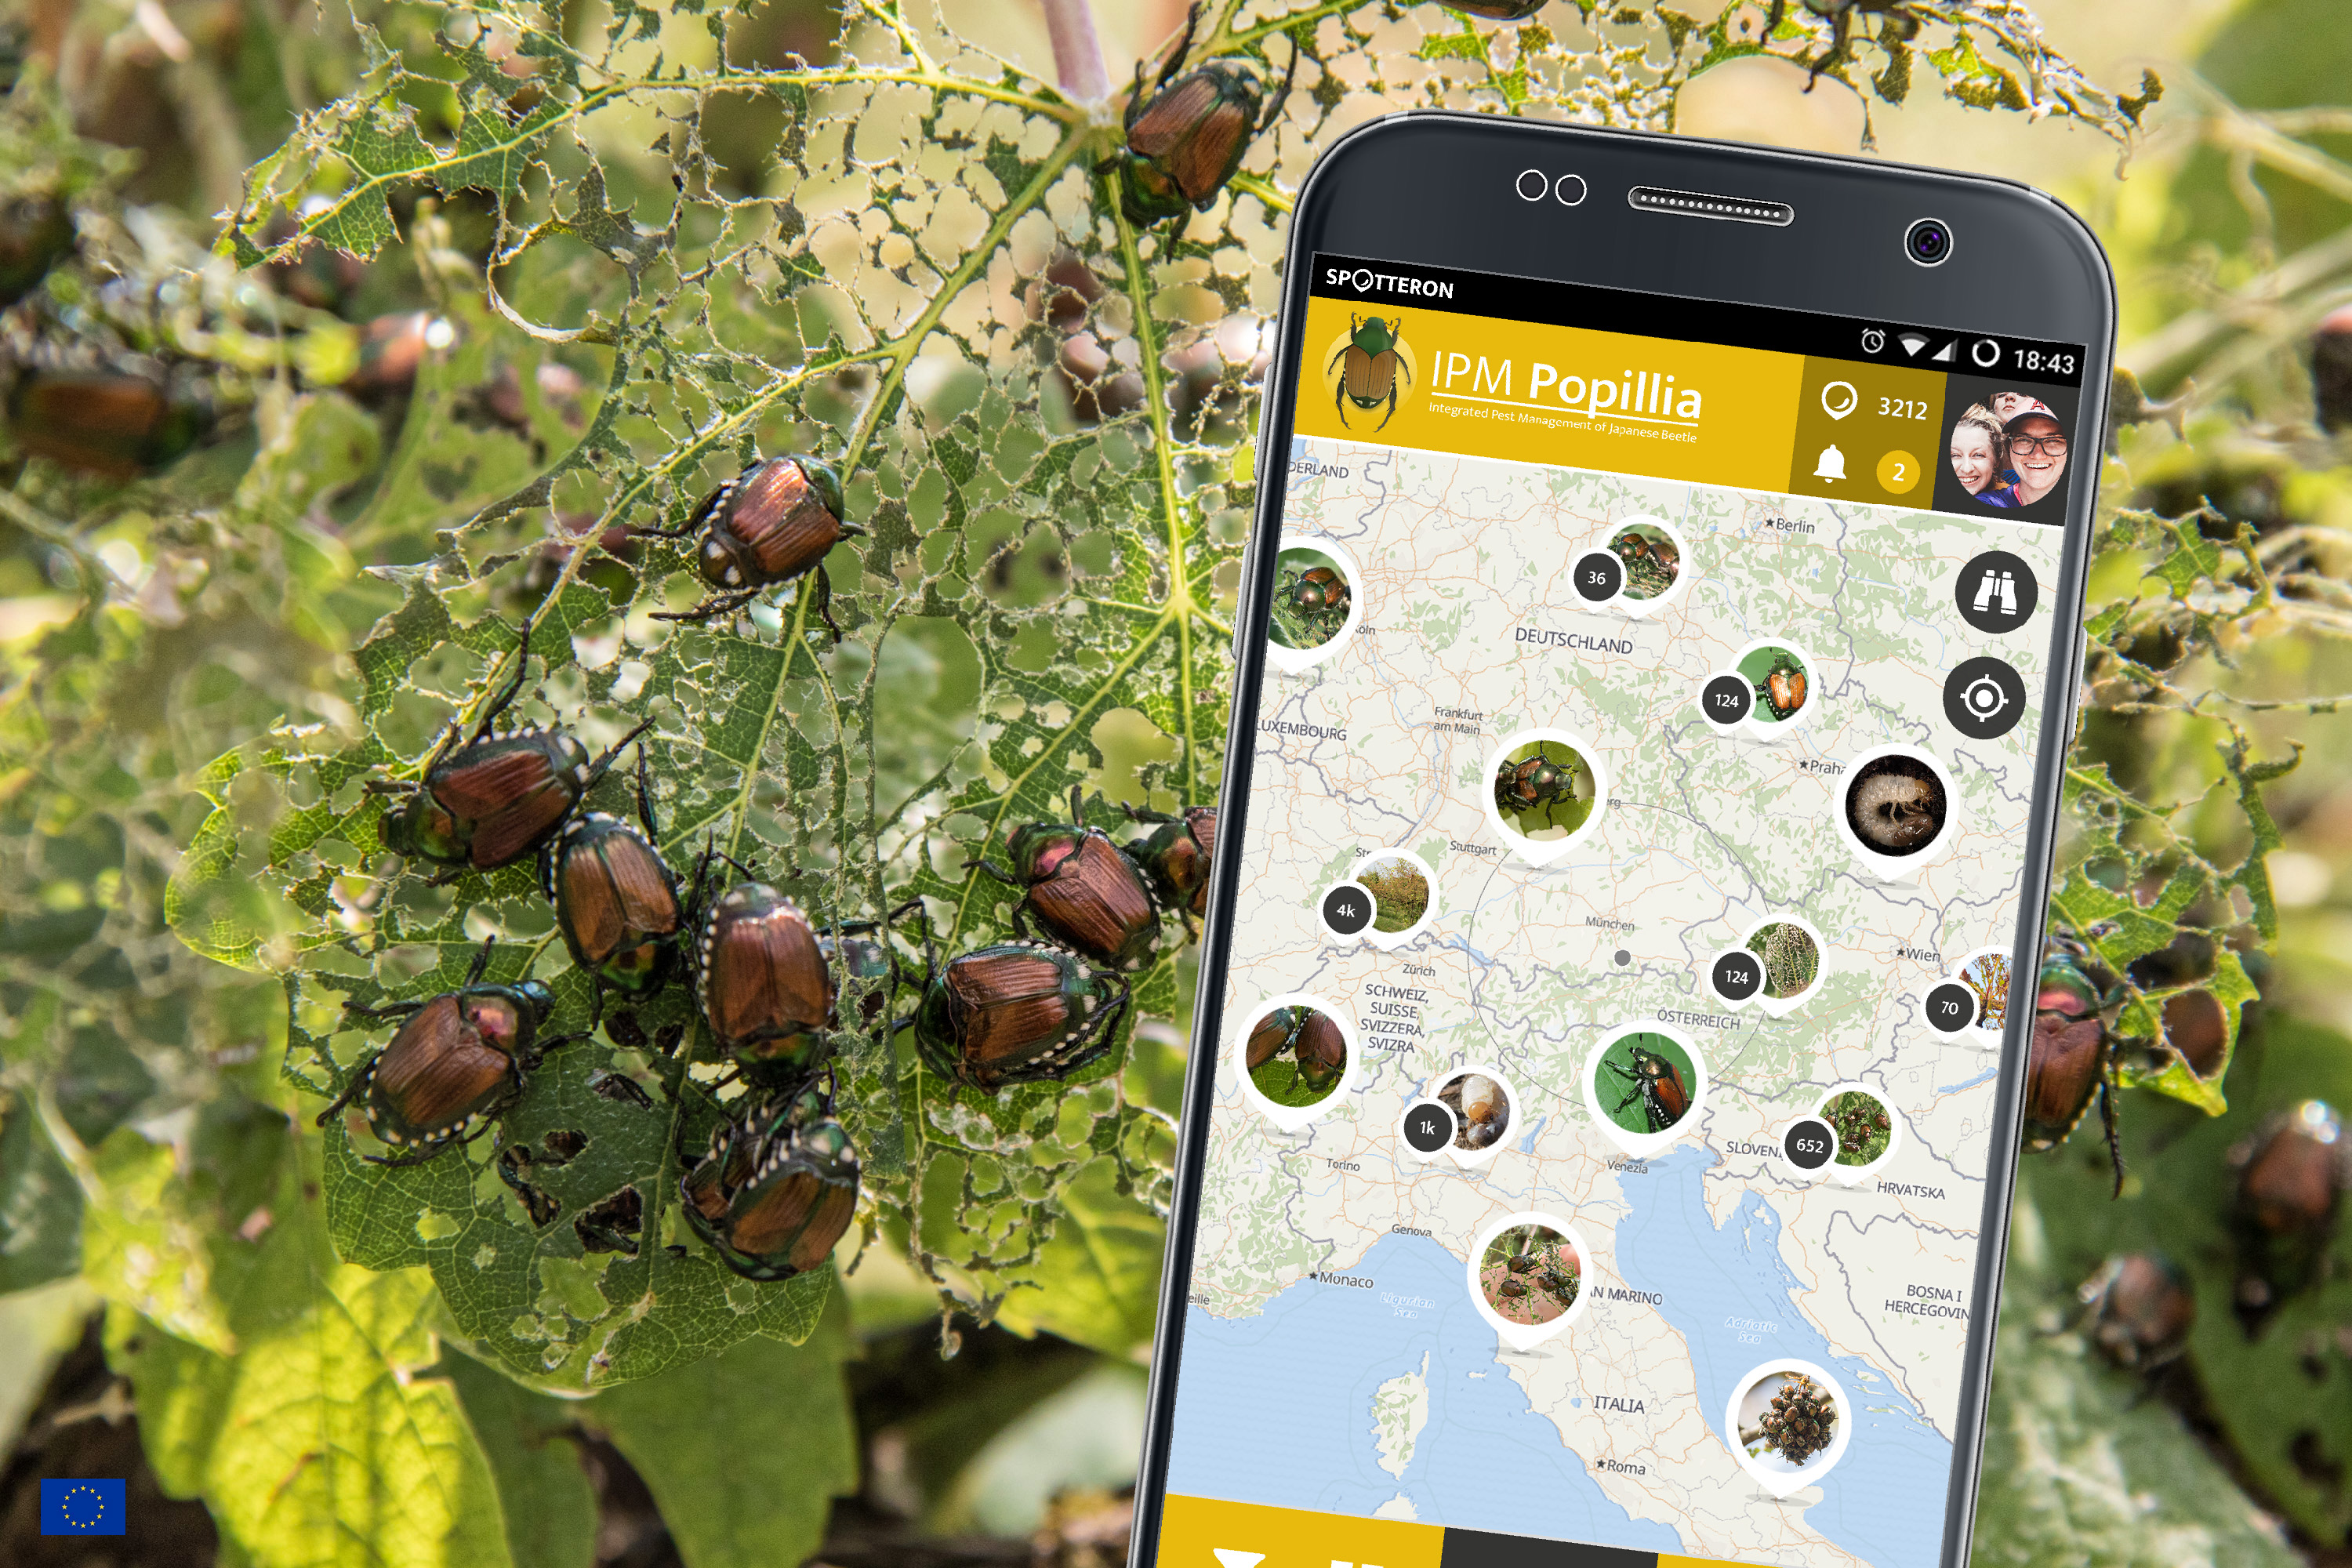 Smartphone Application for monitoring the Japanese Beetle